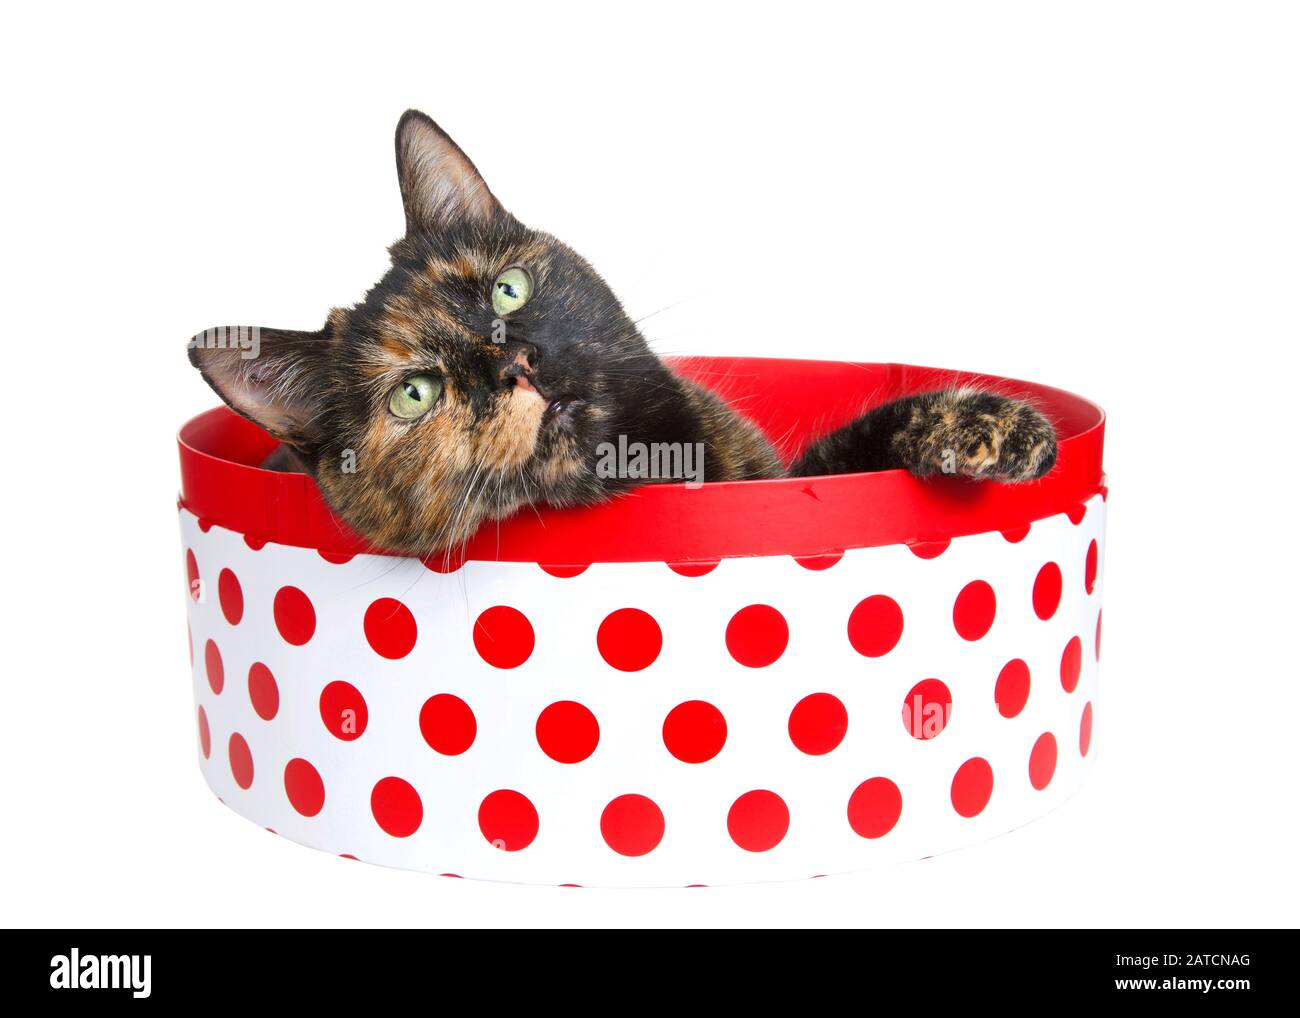 Tortoiseshell tortie torbie cat laying in a round white box with red polka dots peaking over the side, paw on box looking slightly above viewer. Isola Stock Photo